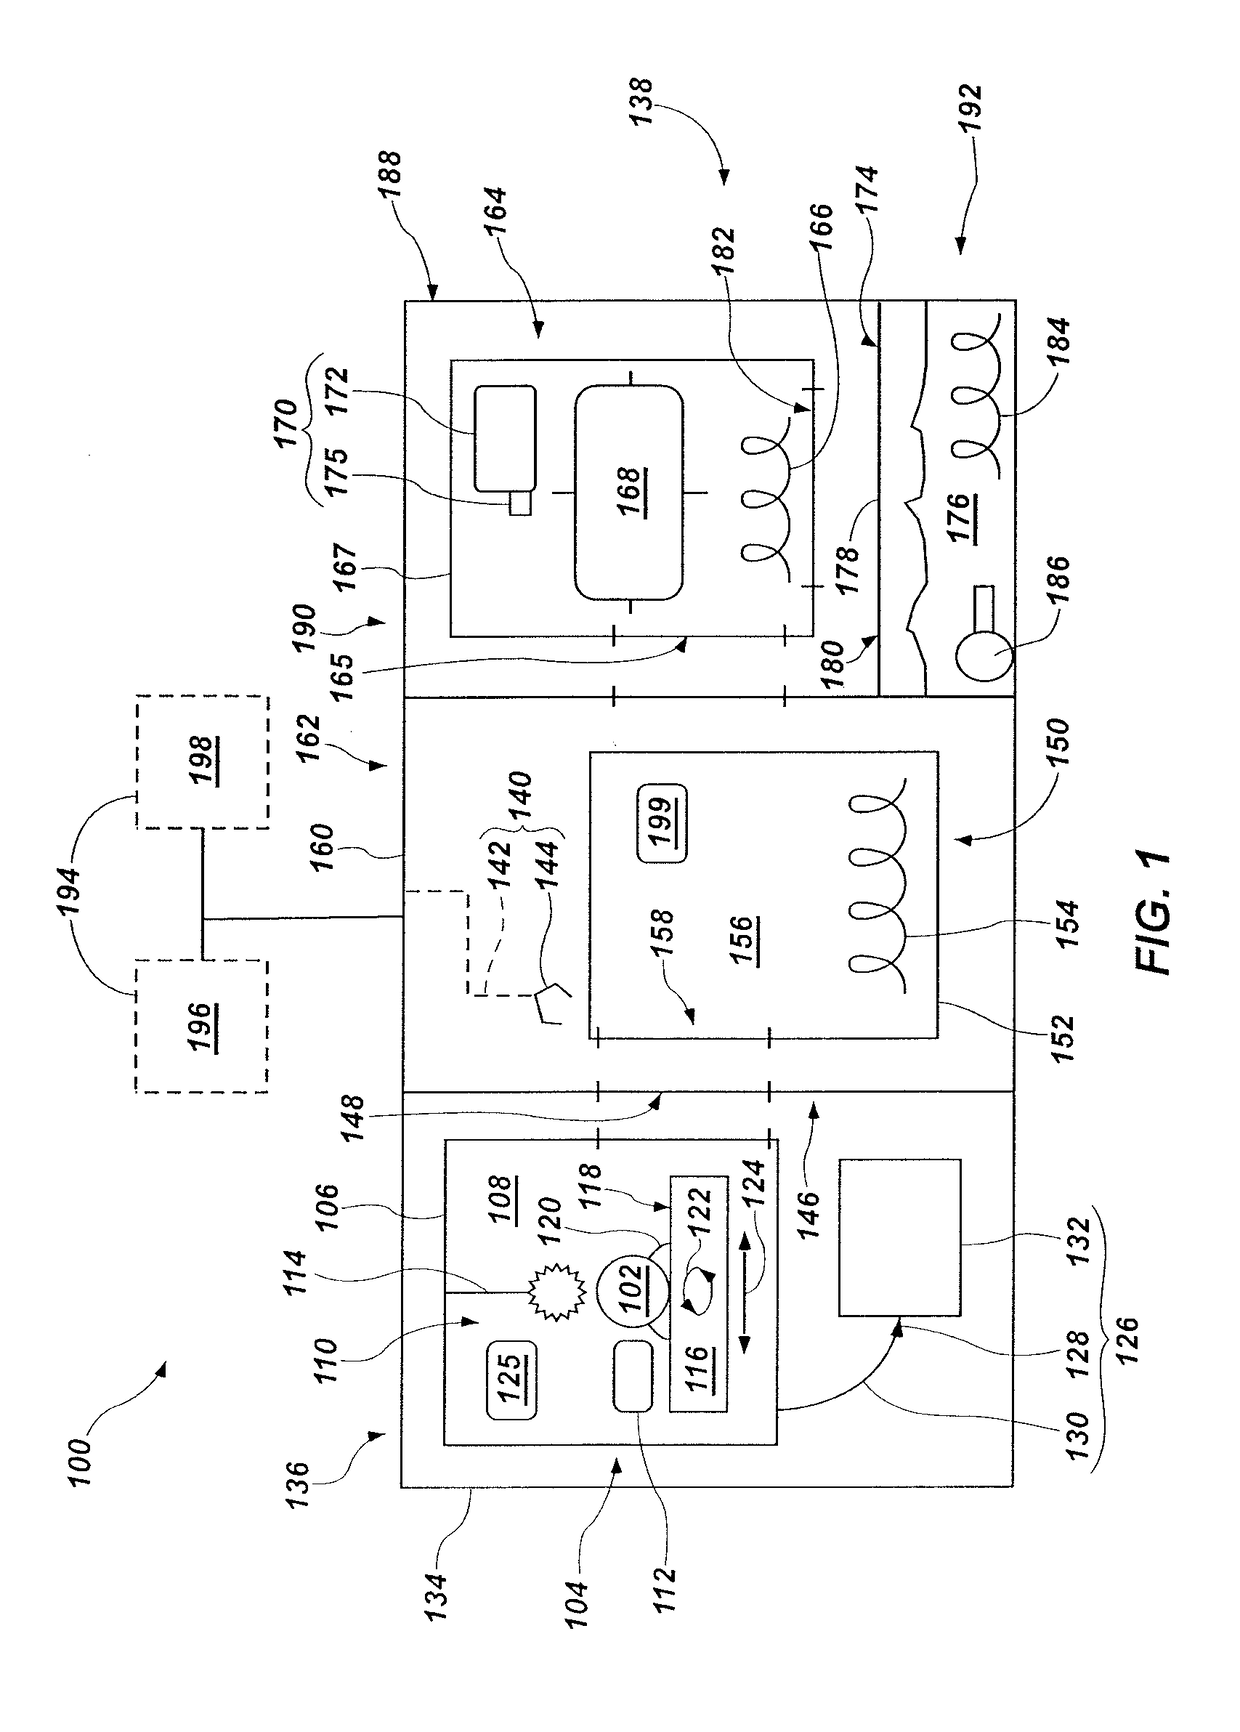 3d-printing systems configured for advanced heat treatment and related methods